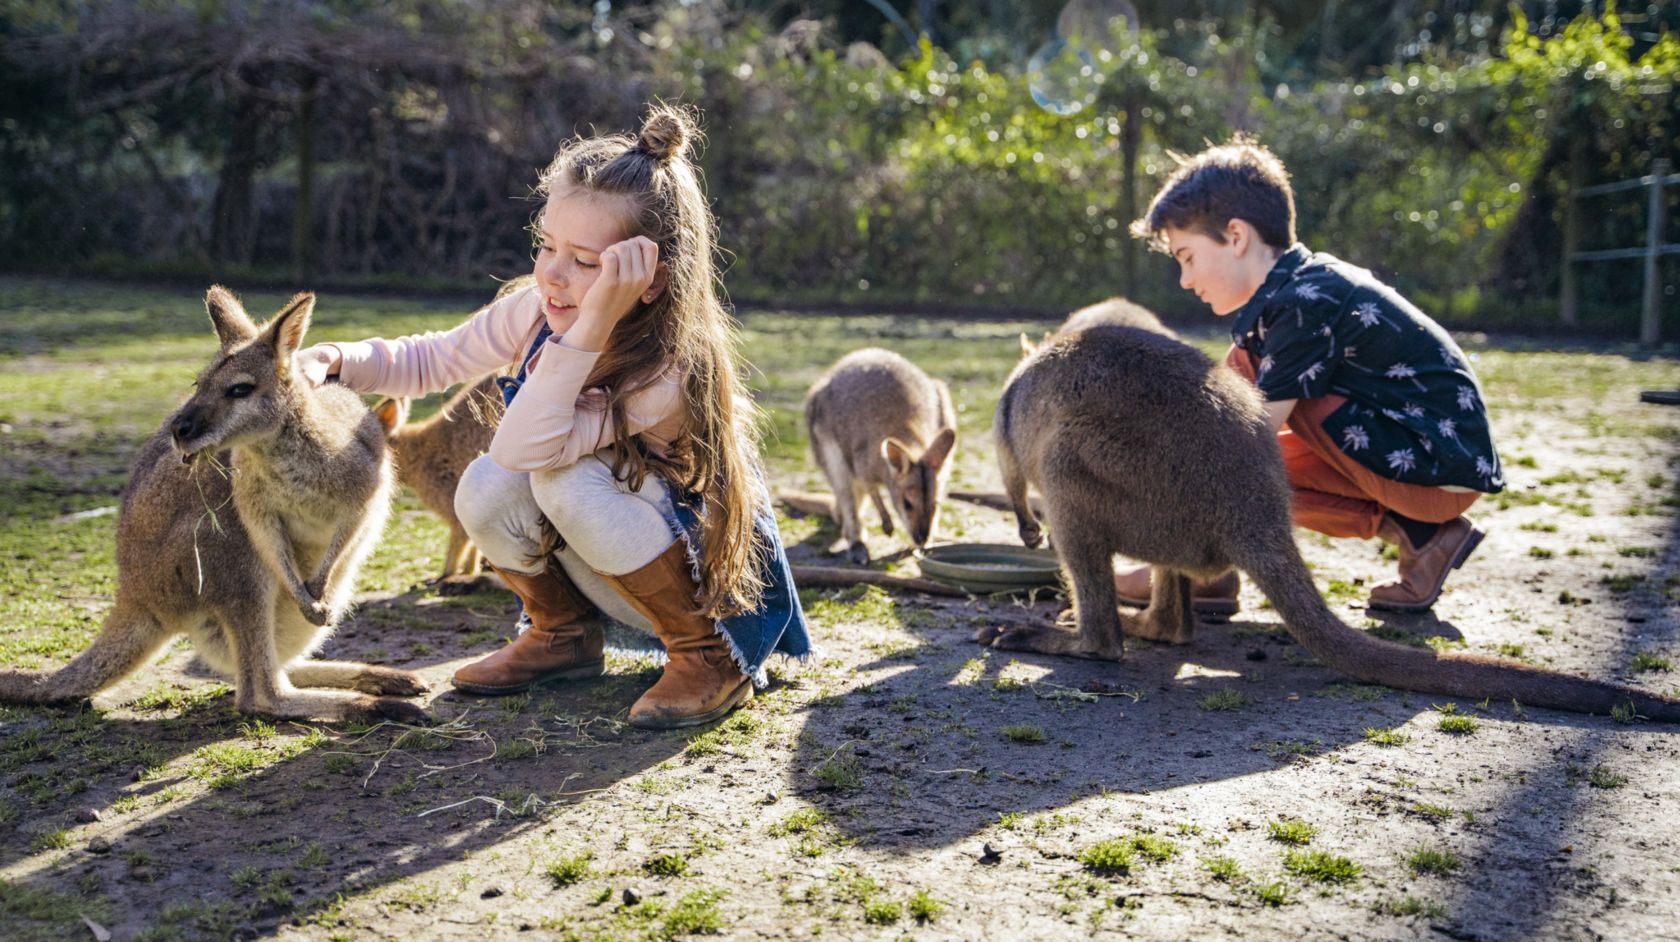 A Group Of People Playing With Animals